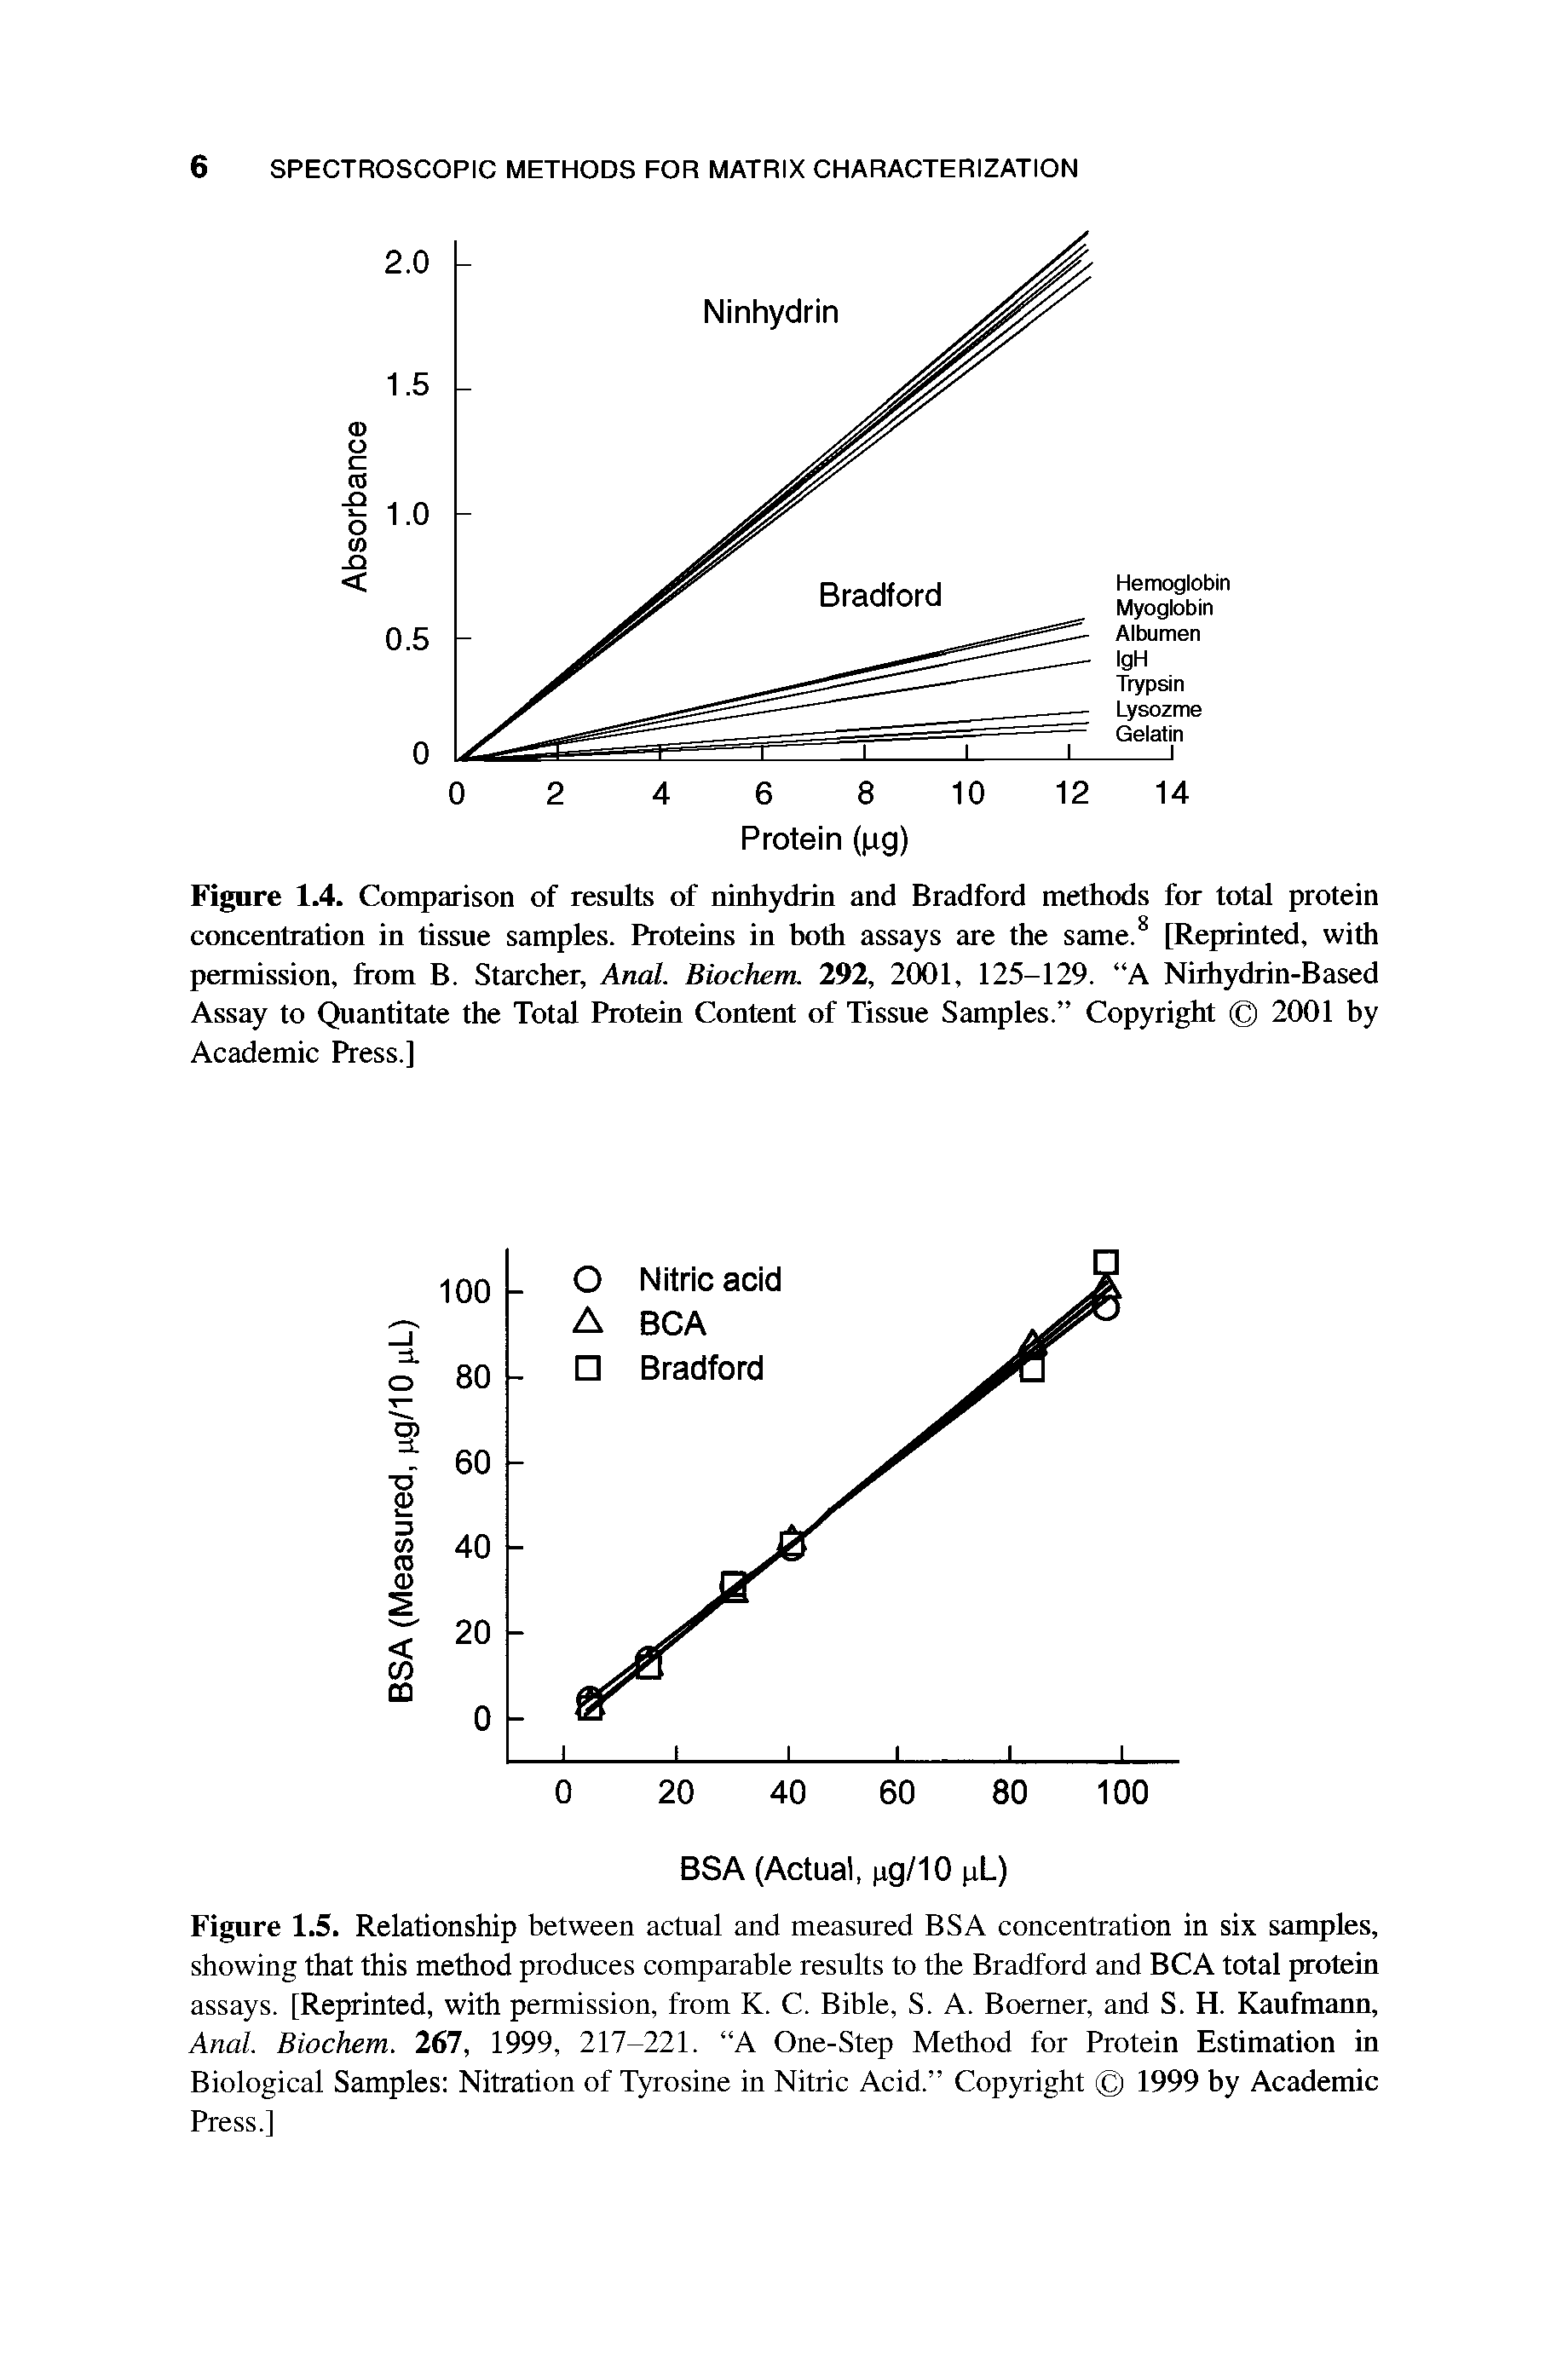 Figure 1.5. Relationship between actual and measured BSA concentration in six samples, showing that this method produces comparable results to the Bradford and BCA total protein assays. [Reprinted, with permission, from K. C. Bible, S. A. Boemer, and S. H. Kaufmann, Anal. Biochem. 267, 1999, 217-221. A One-Step Method for Protein Estimation in Biological Samples Nitration of Tyrosine in Nitric Acid. Copyright 1999 by Academic Press.]...